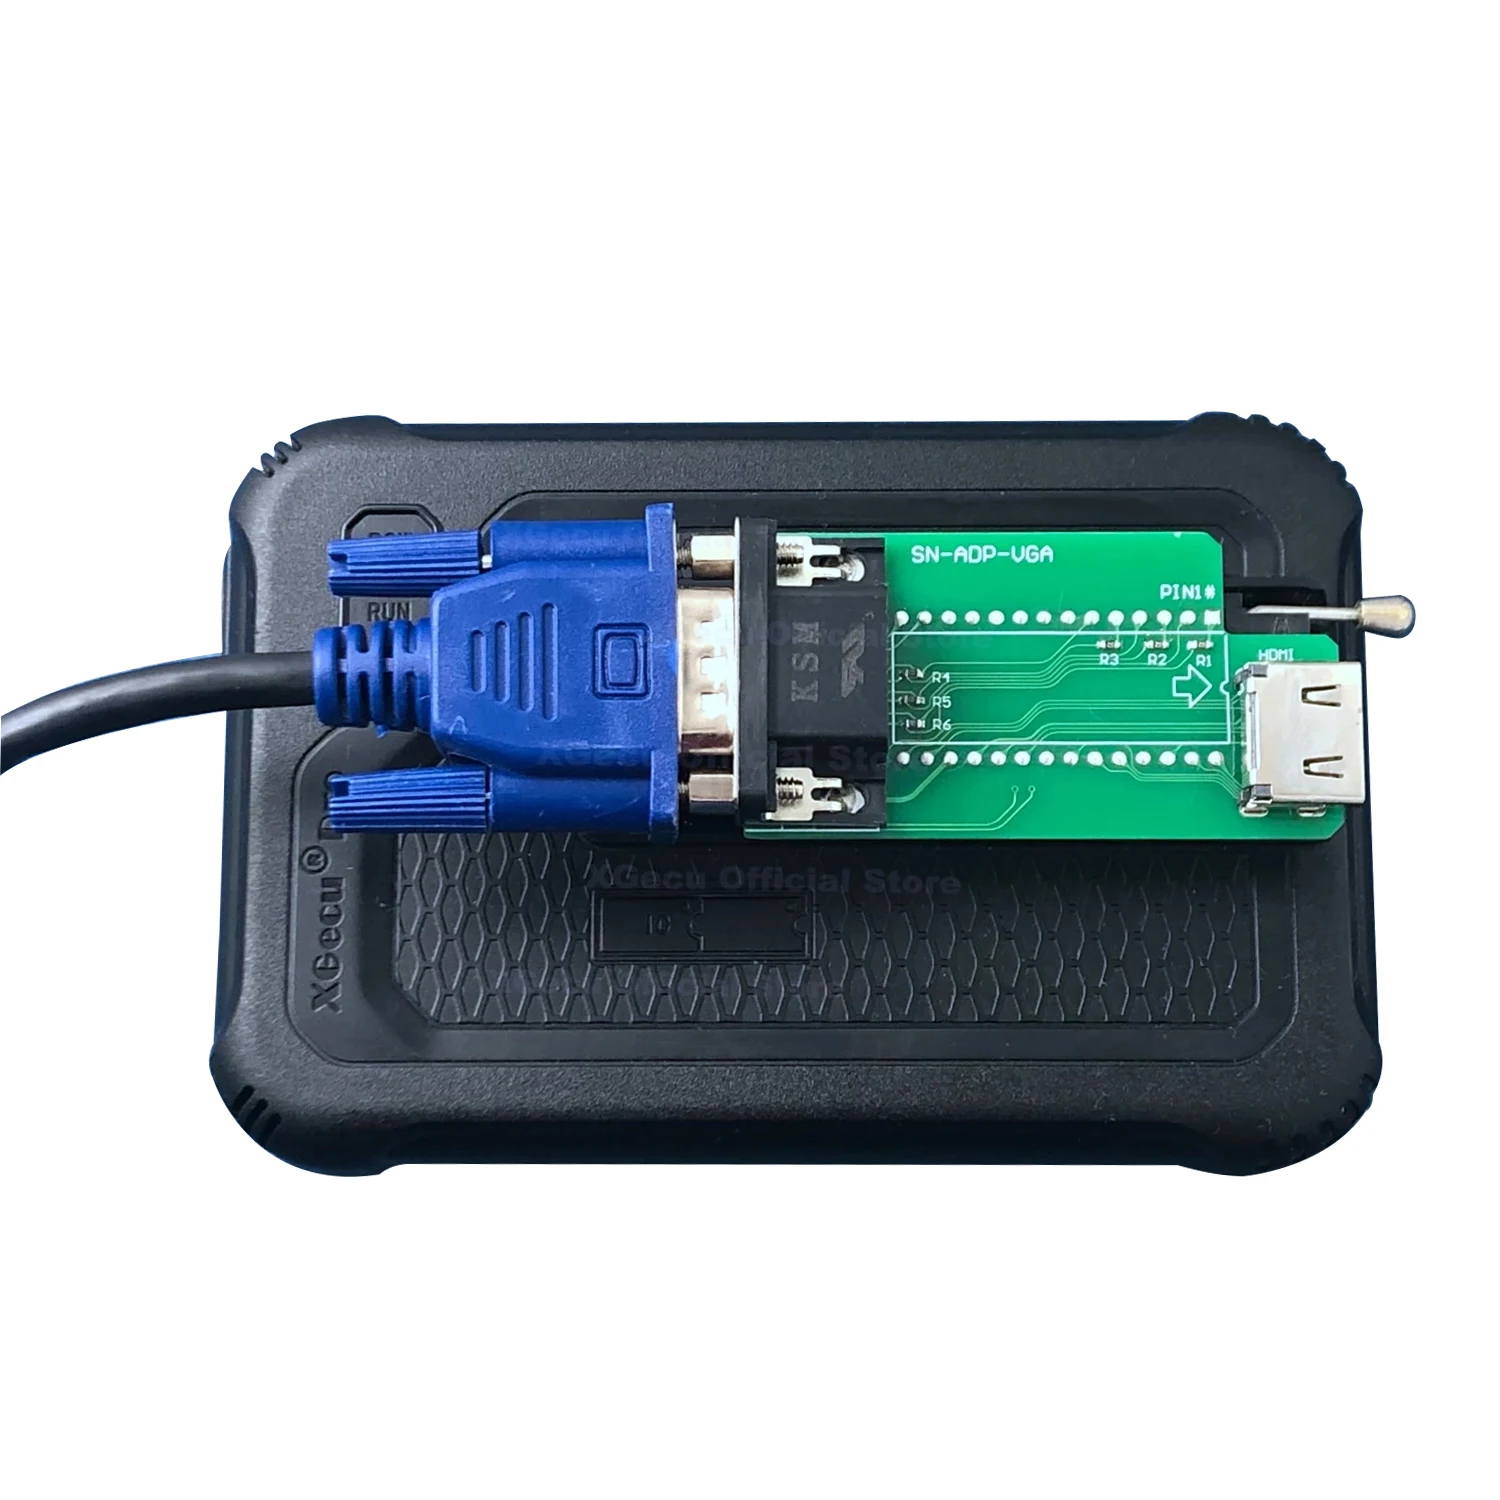 100% Original VGA Adpter Only for XGecu T56 Programmer Support VGA Interface Compatible Smart Socket Free Shipping image_1